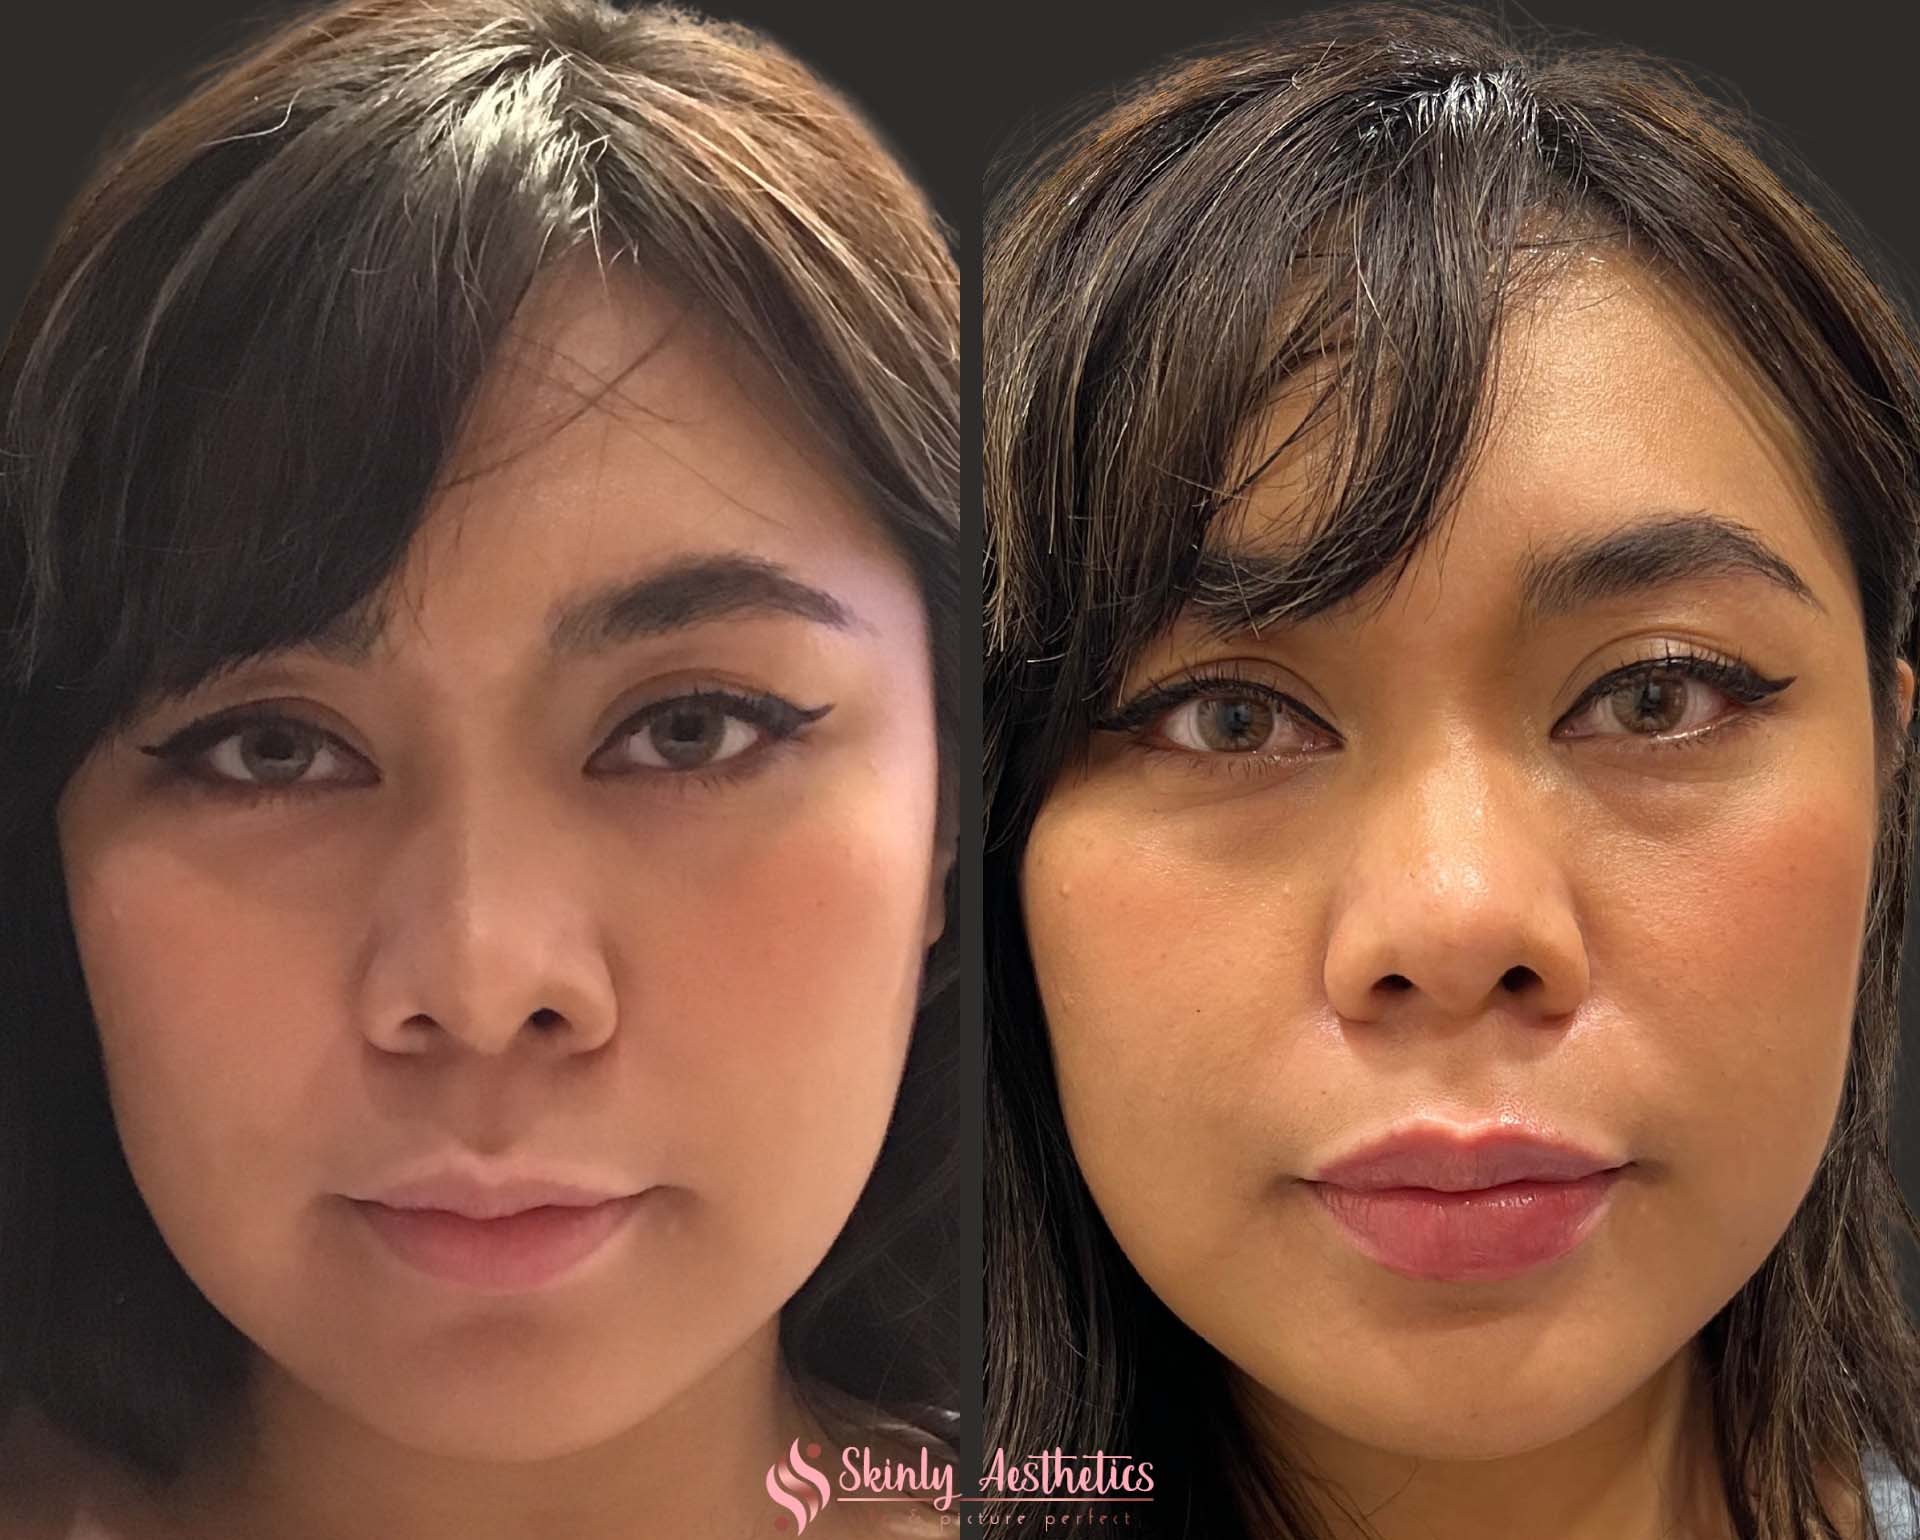 before and after results following Restylane lip filler augmentation